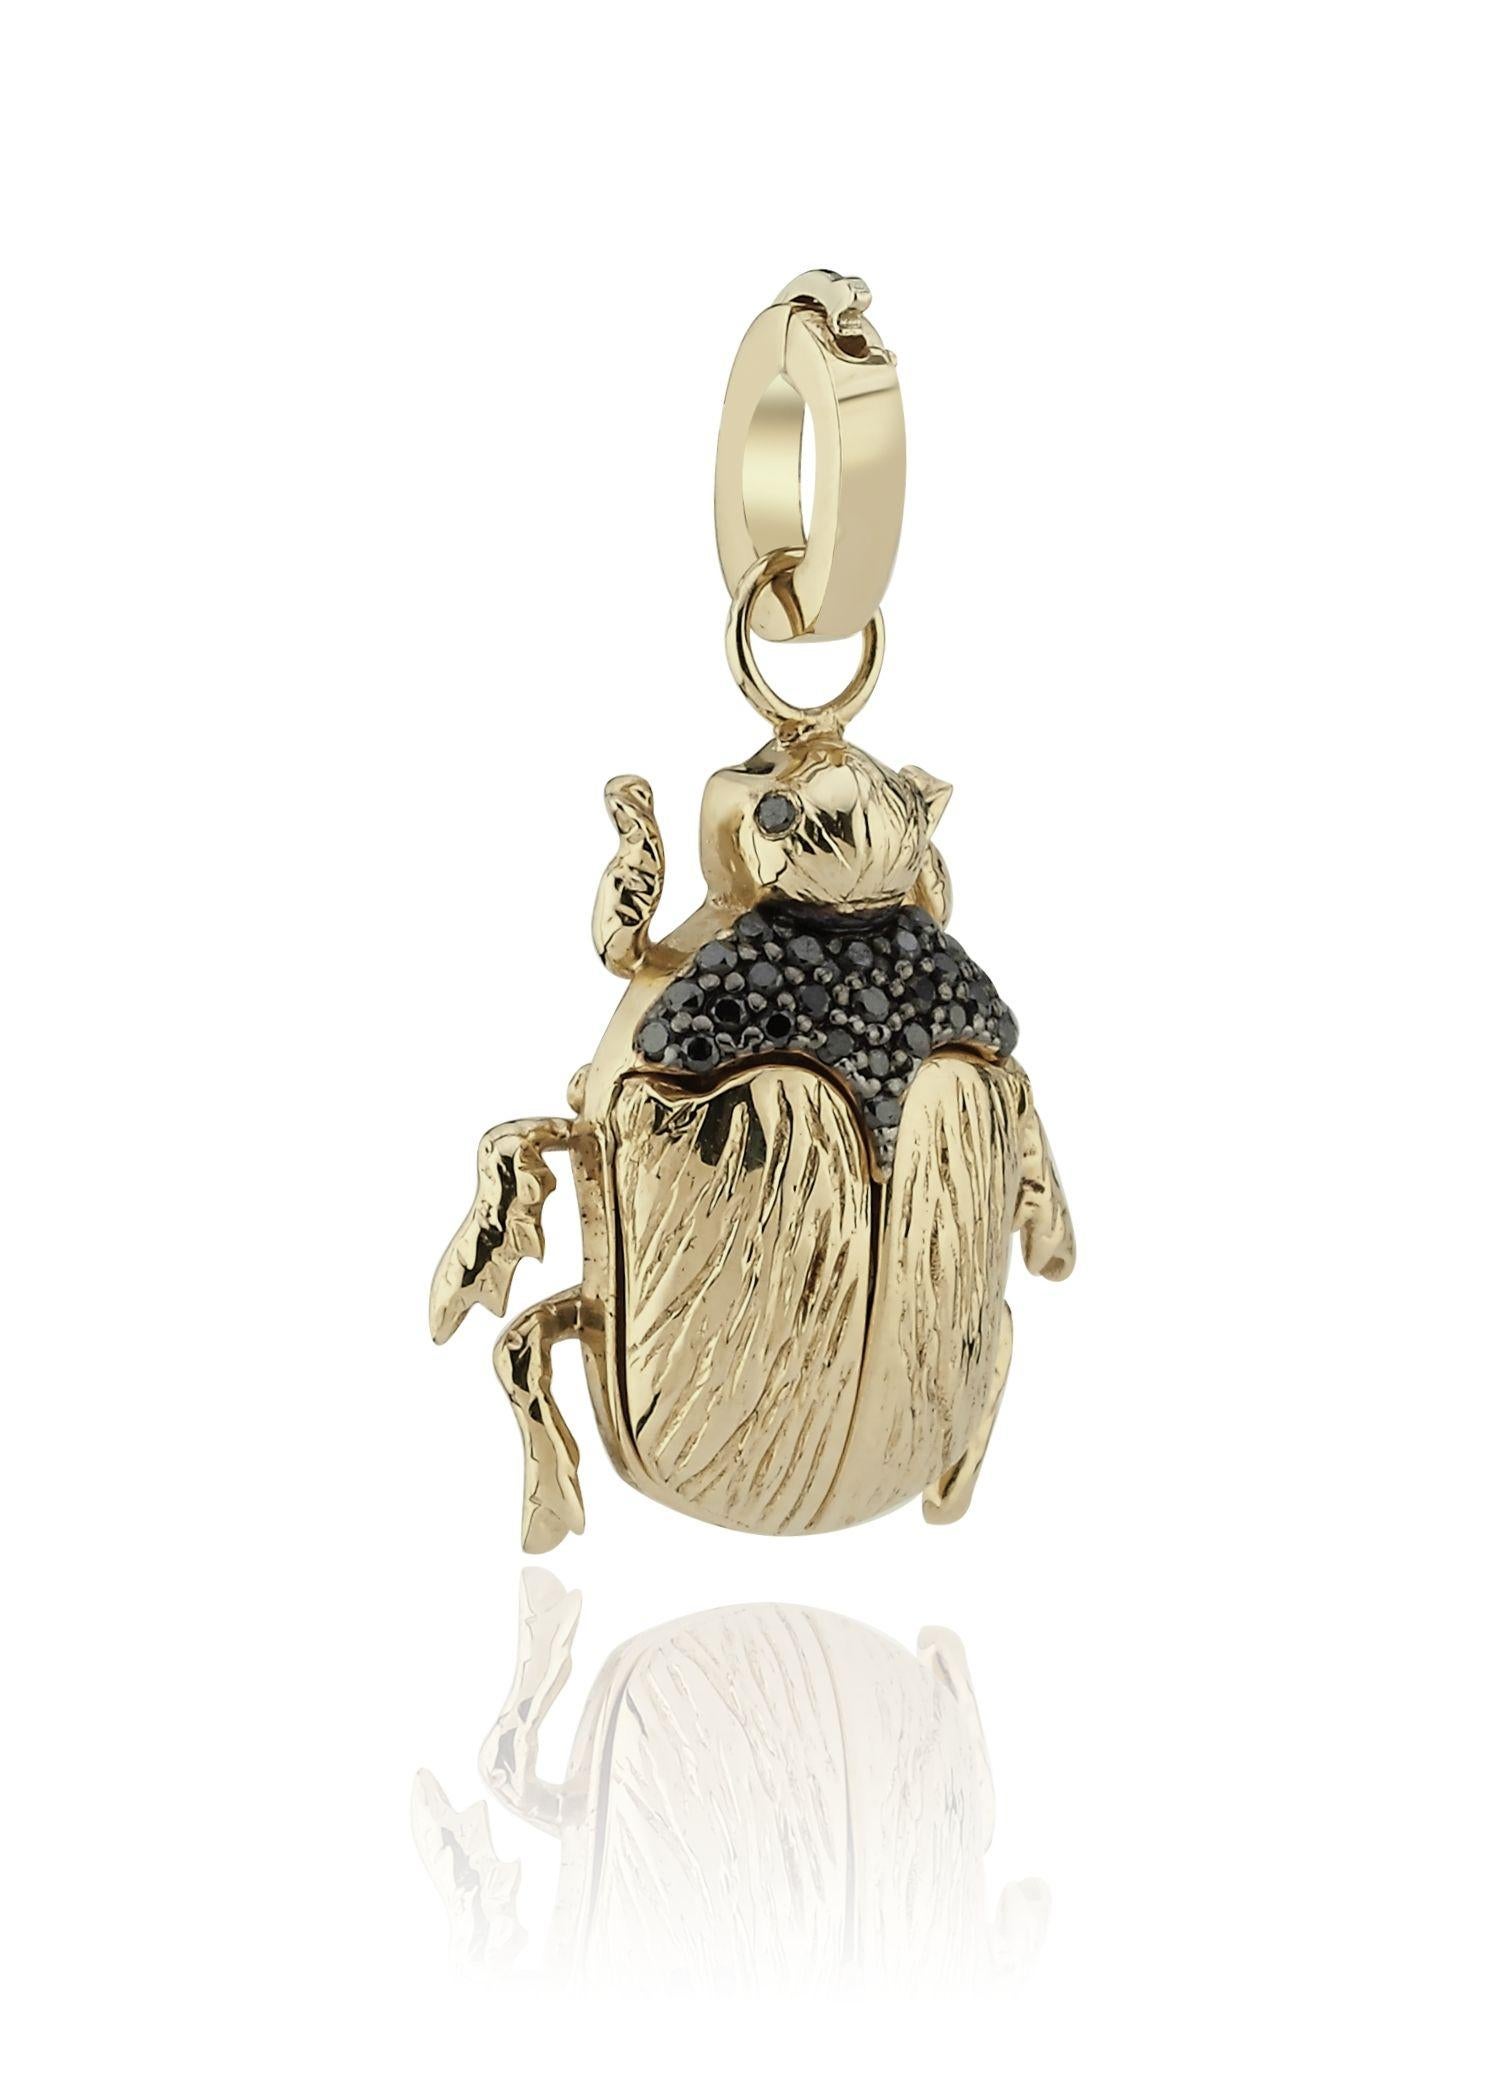 Melie Jewelry Scarab Locket Charm

14K Gold, 0.15 ct Black Diamond

The Story Behind
The Scarab Charm from our Cleopatra collection offers a unique experience to the wearer with its opening wings and the ability to place photos inside. Adorned with